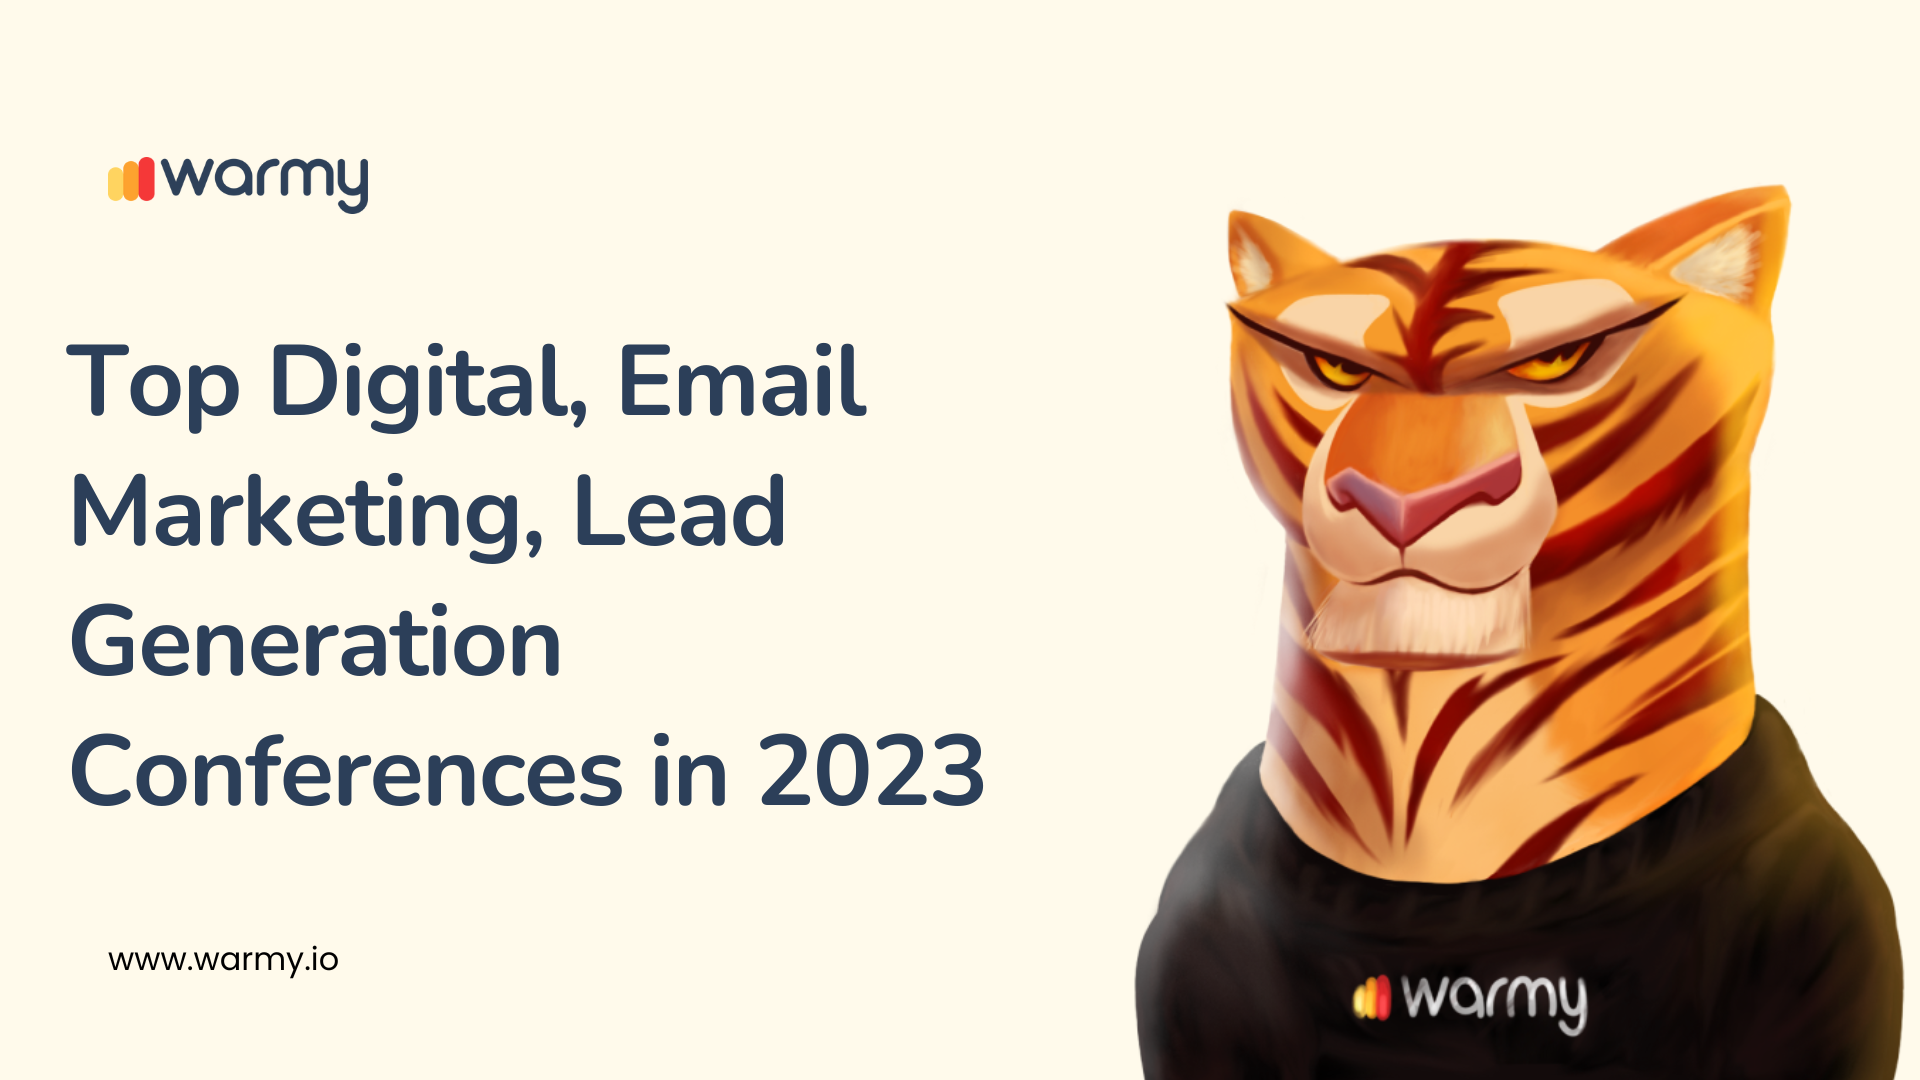 Top Digital, Email Marketing, Lead Generation Conferences in 2023